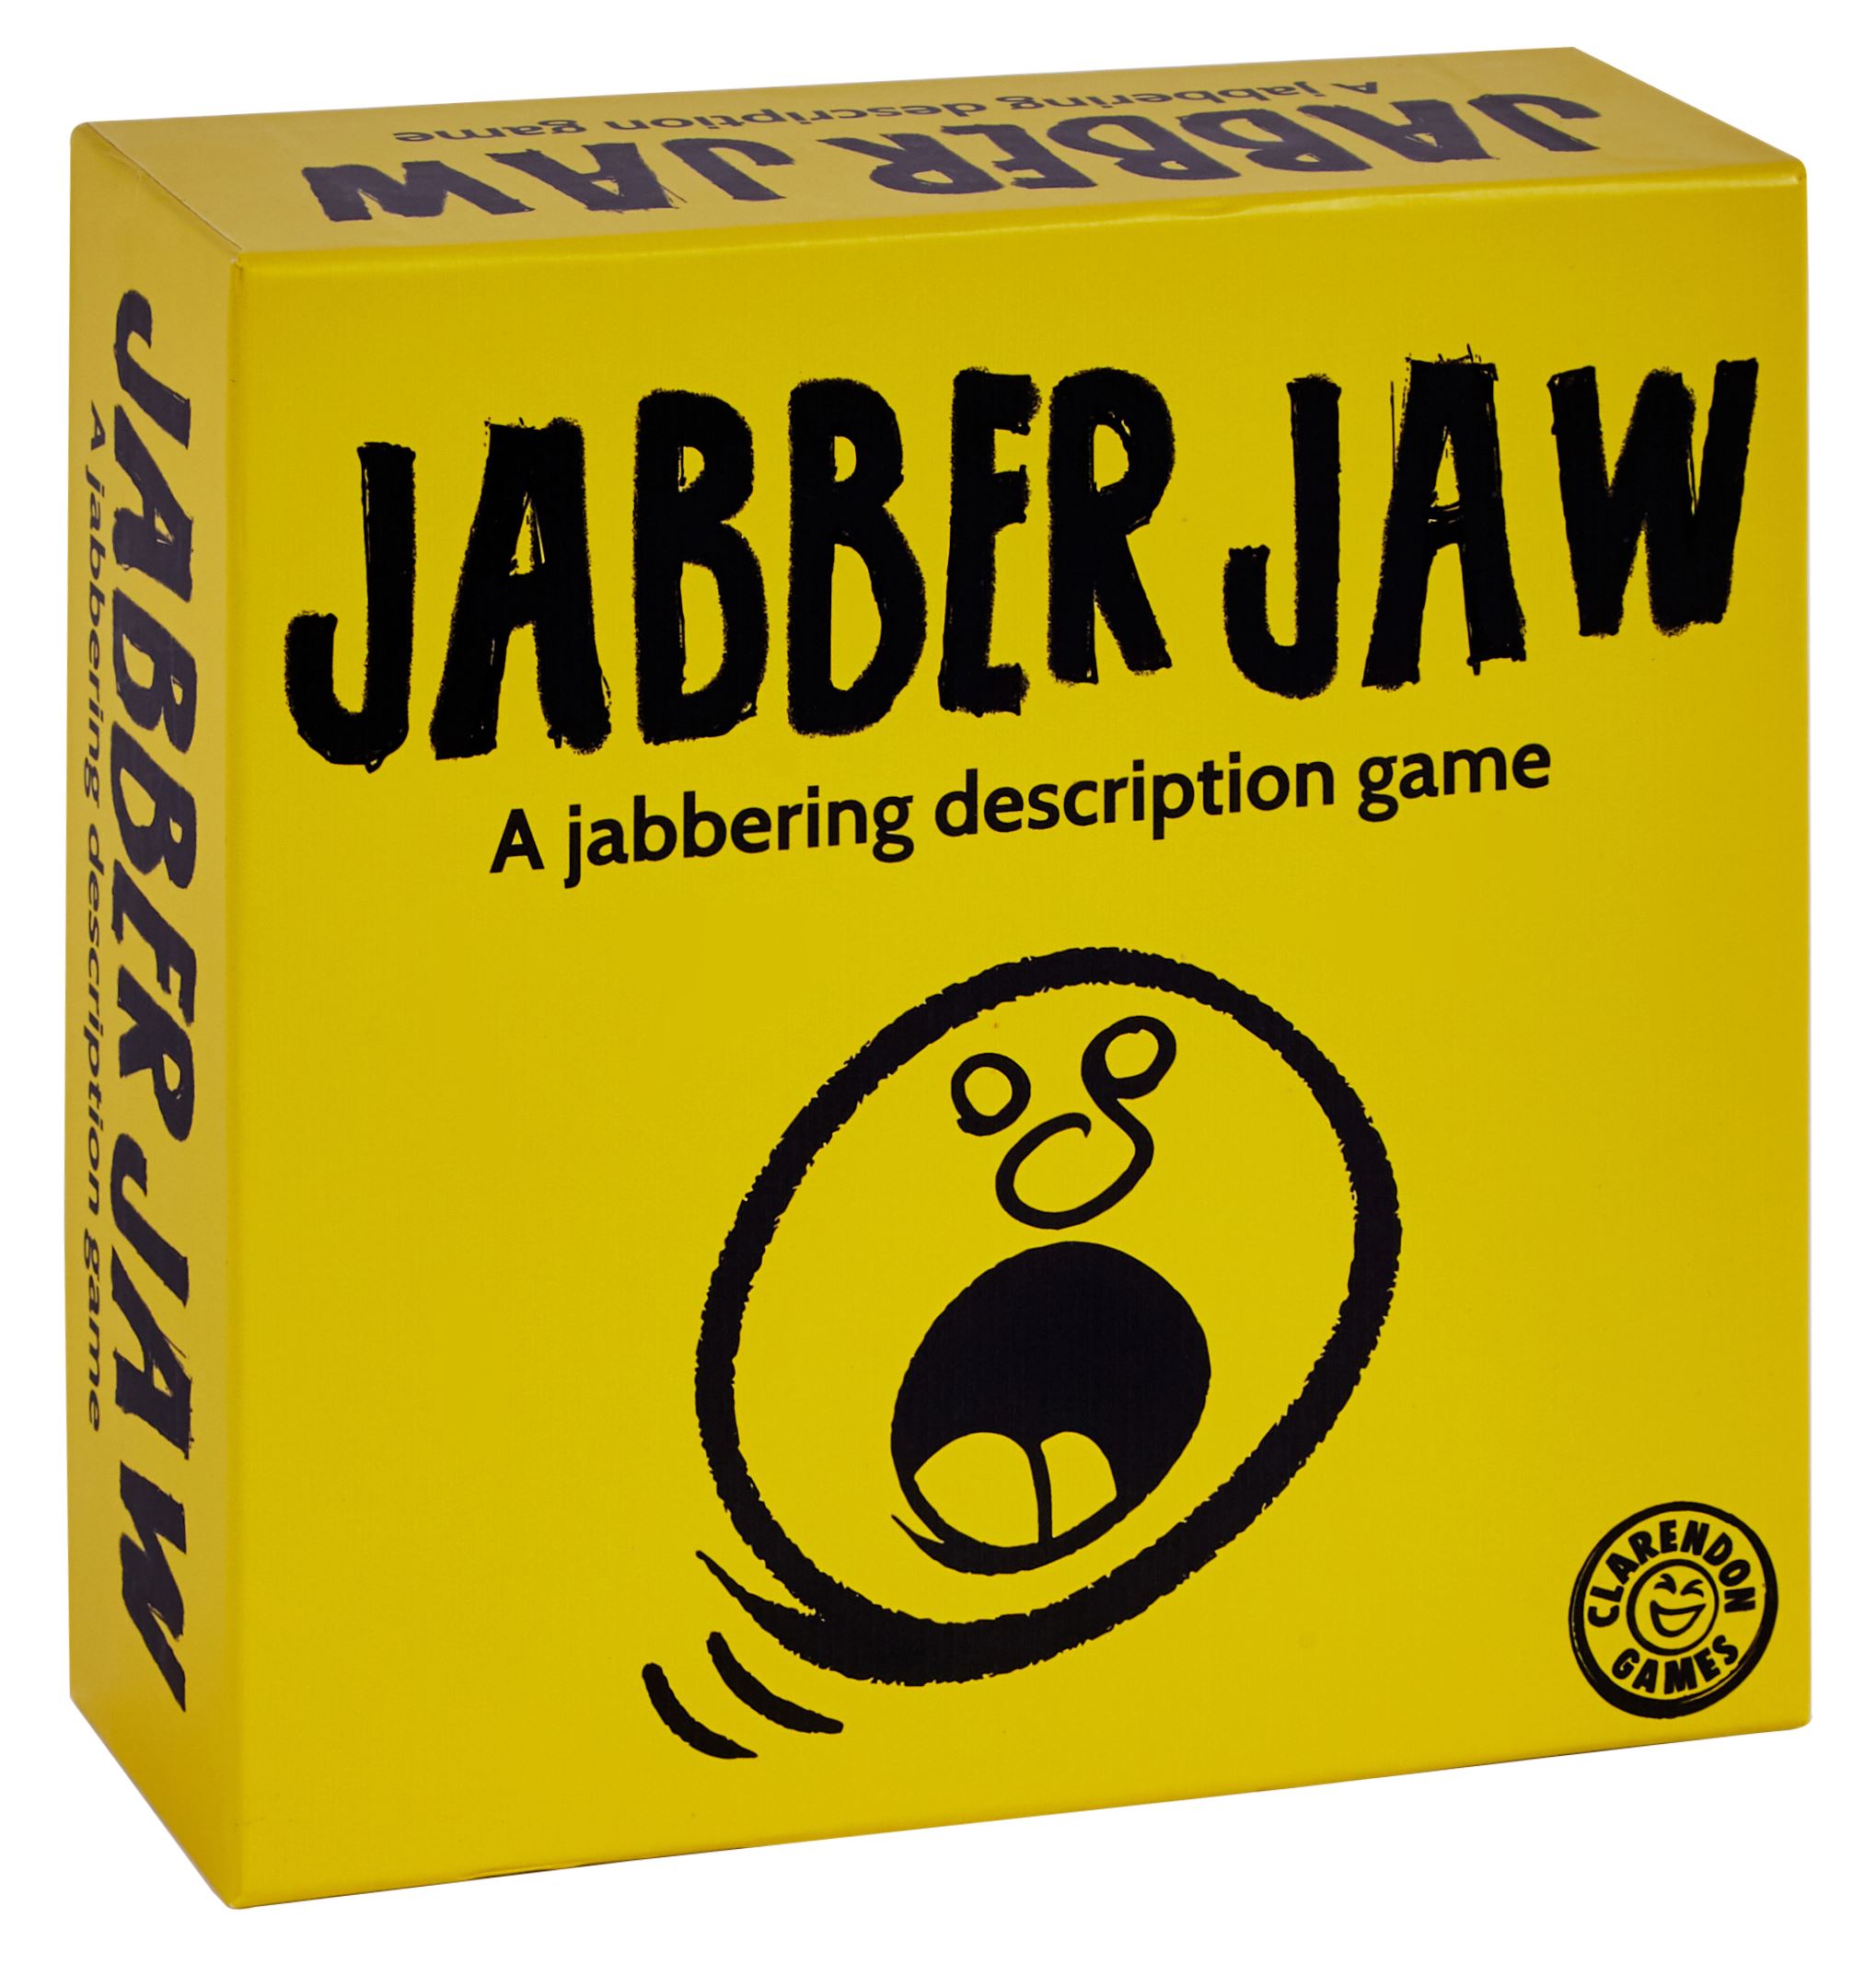 serious jibber jabber review